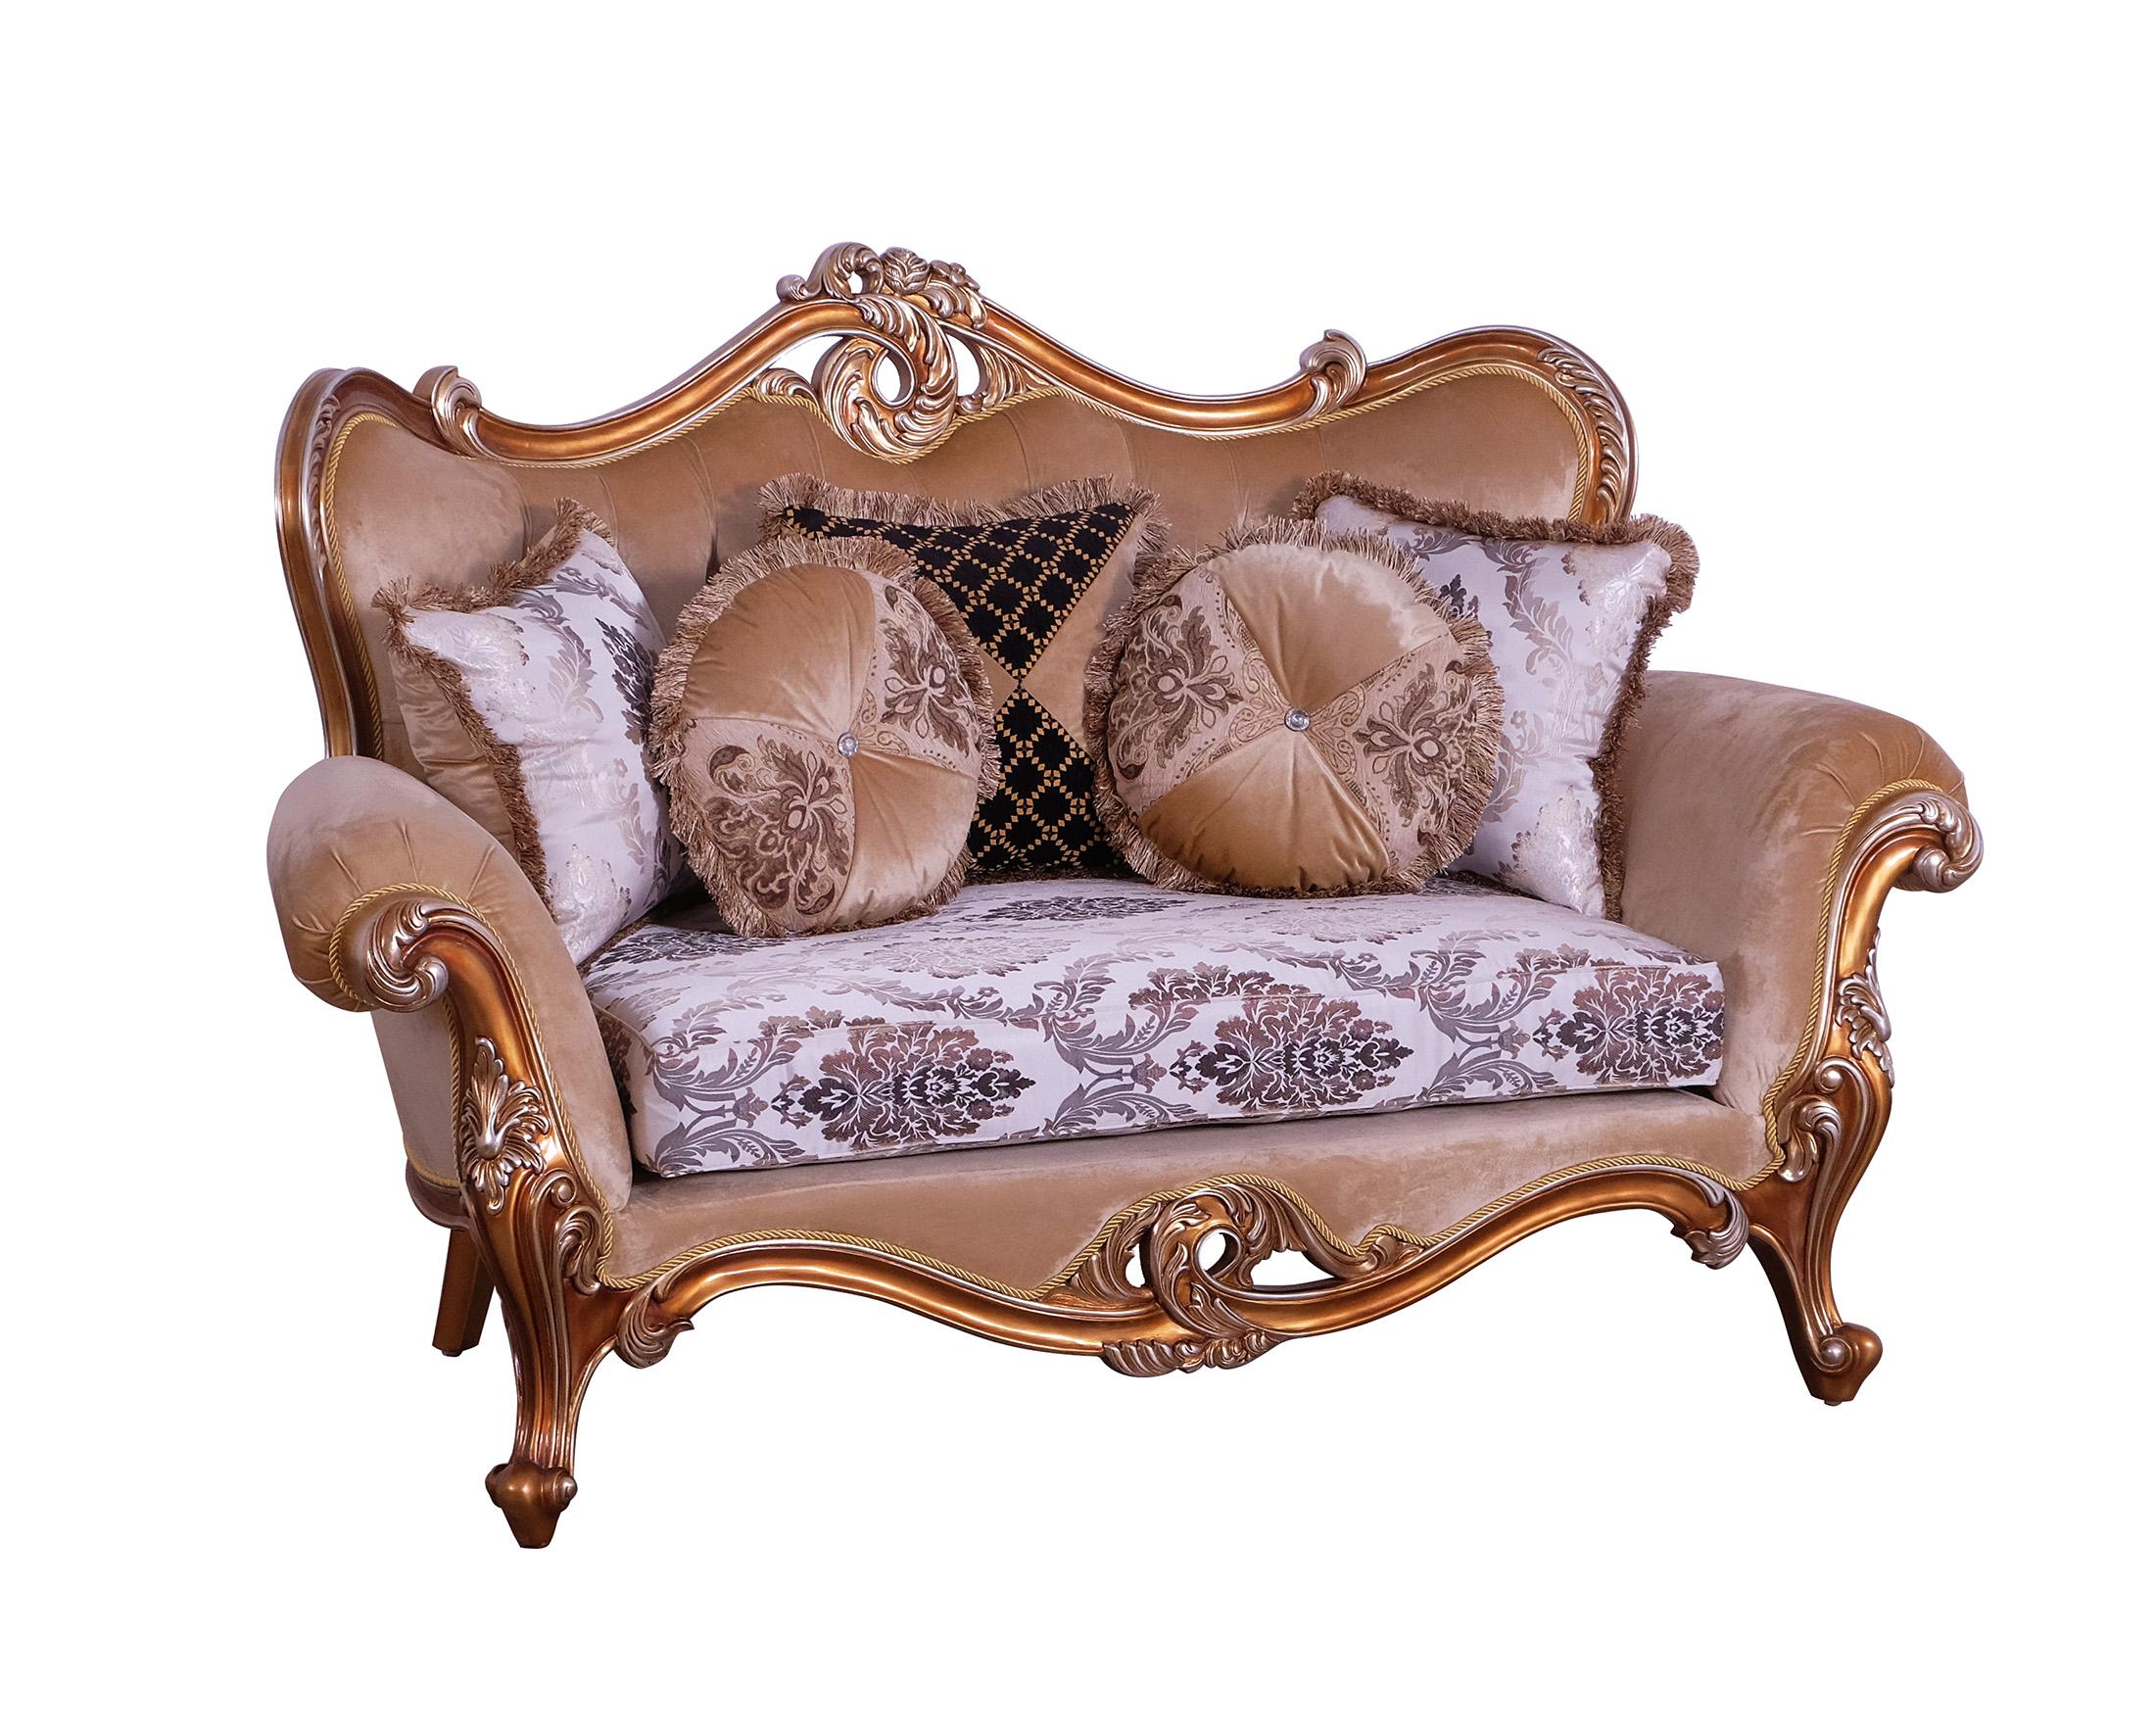 Classic, Traditional Loveseat AUGUSTUS II 37059-L in Sand, Gold, Black Fabric